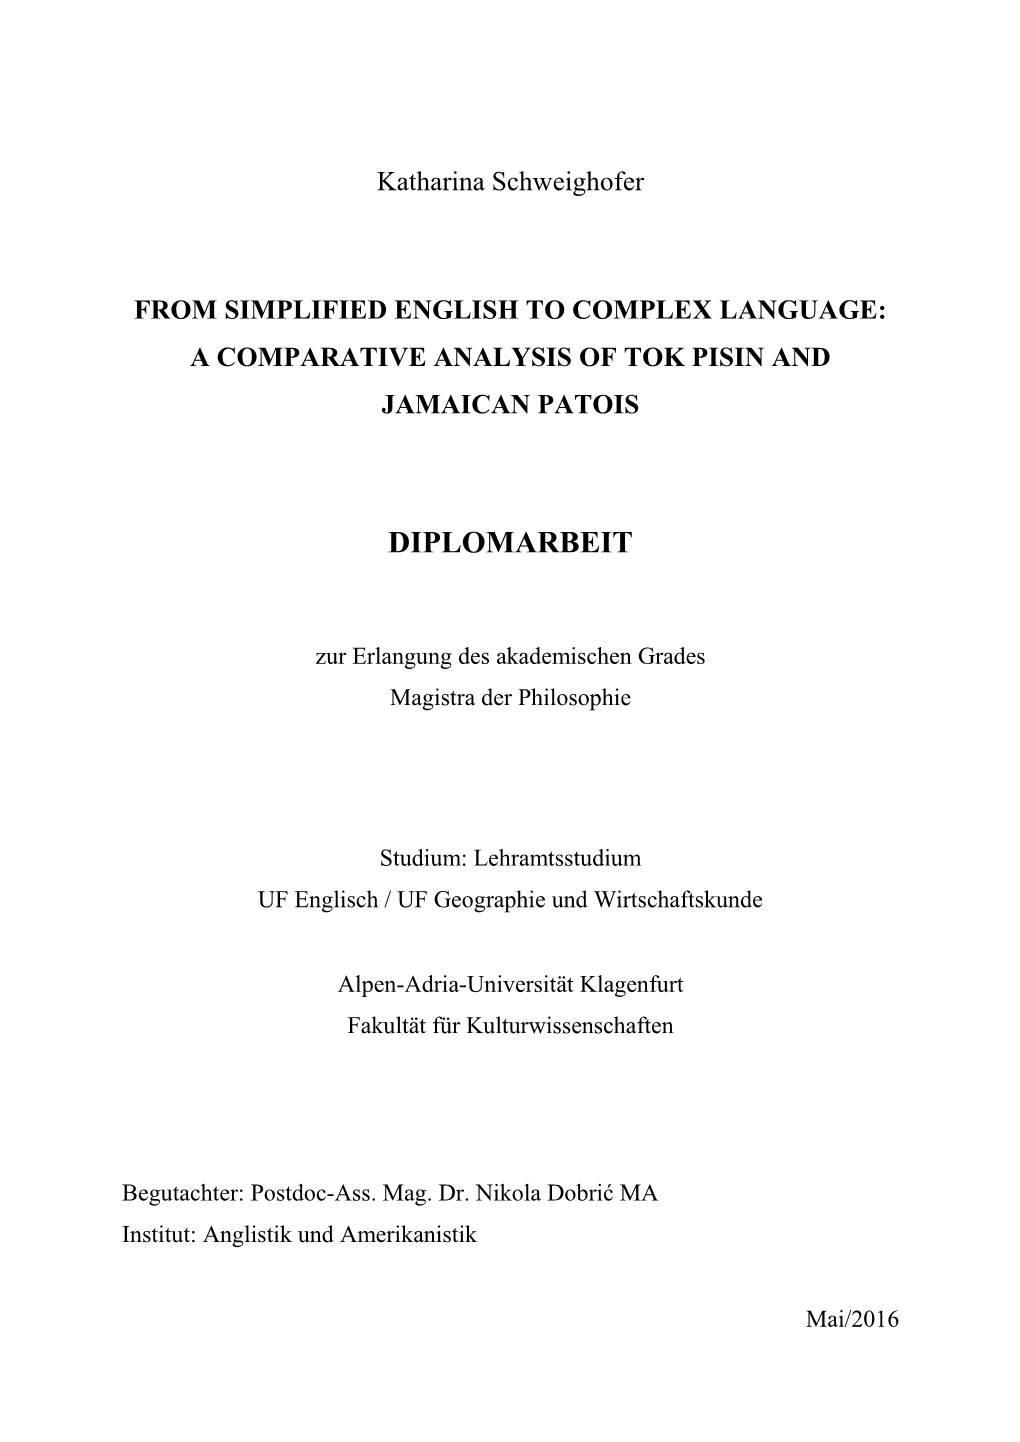 A Comparative Analysis of Tok Pisin and Jamaican Patois Diplomarbeit